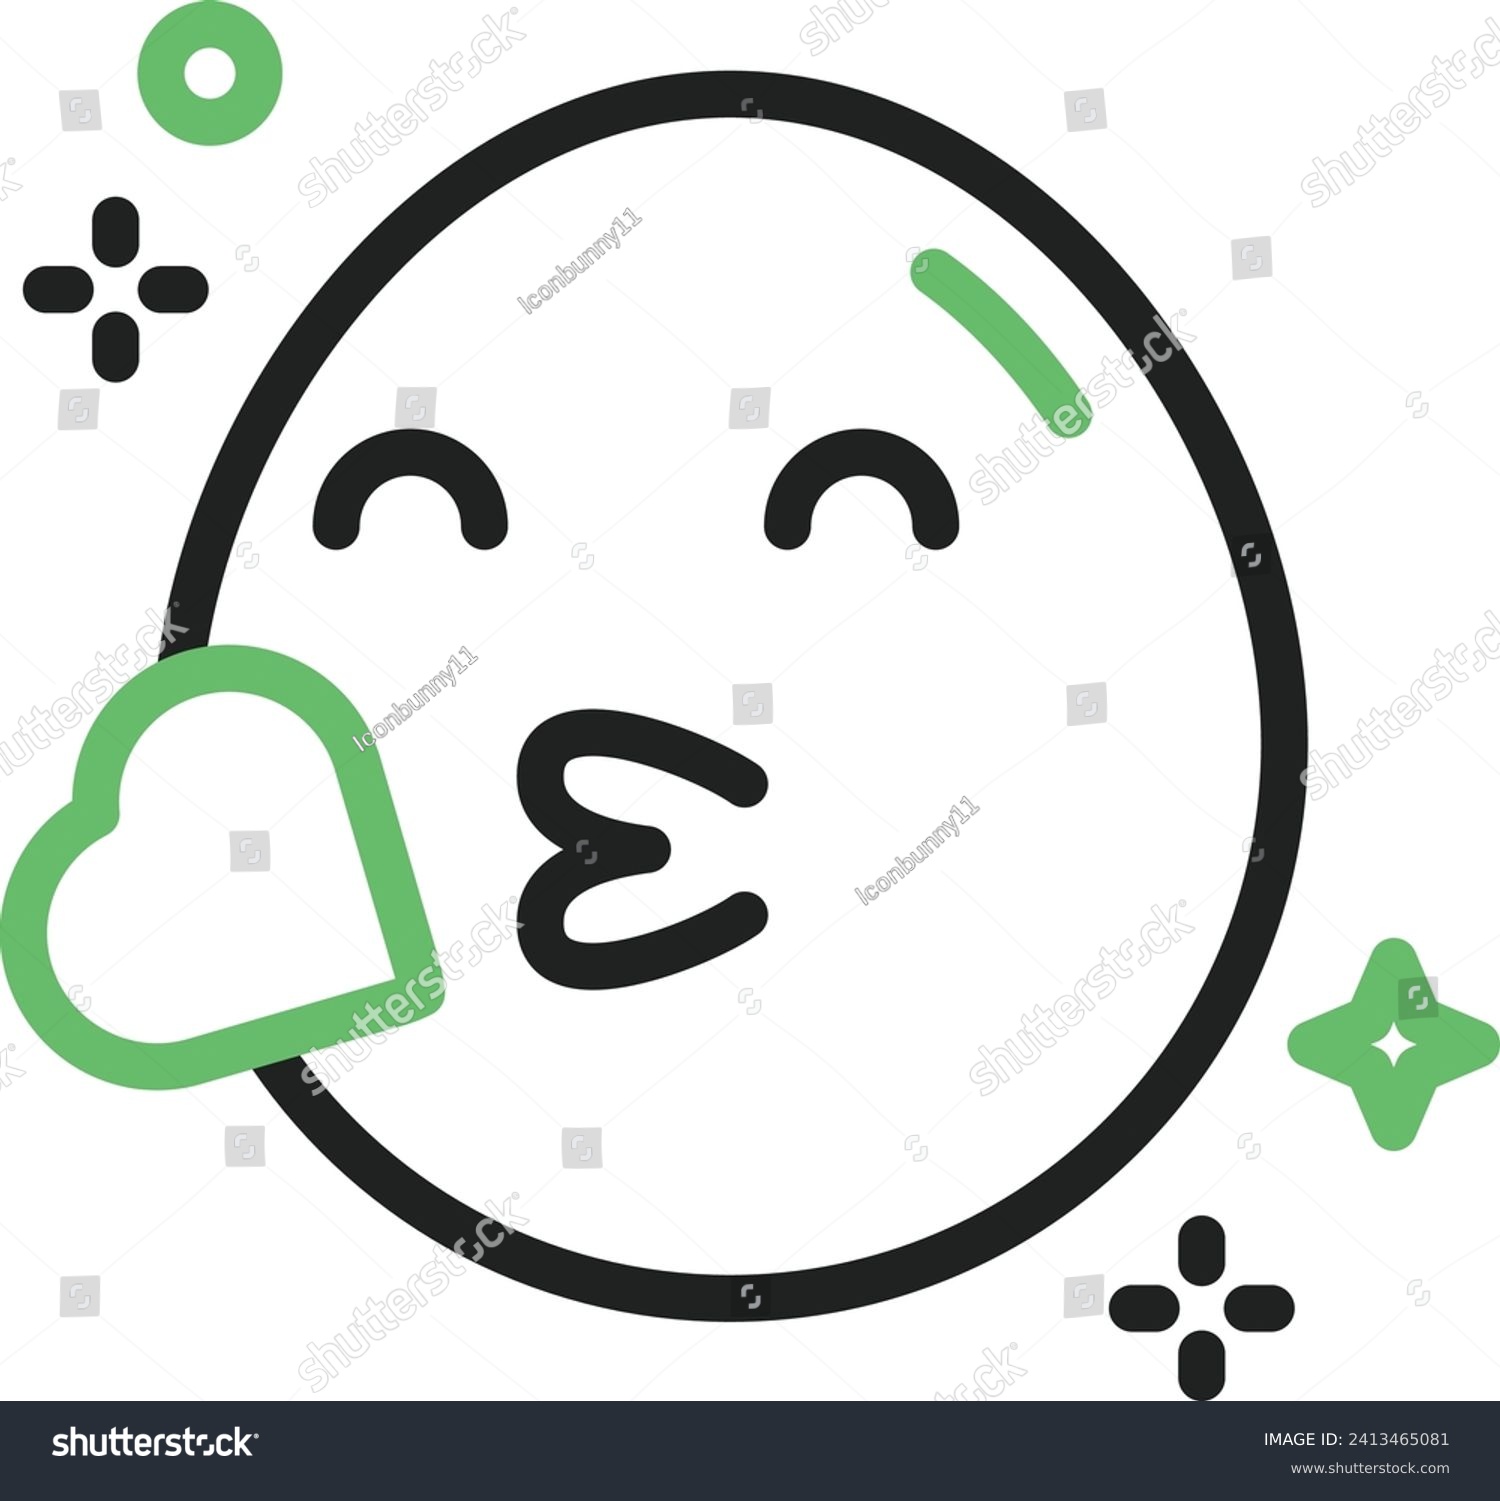 SVG of Face Blowing a Kiss icon vector image. Suitable for mobile application web application and print media. svg